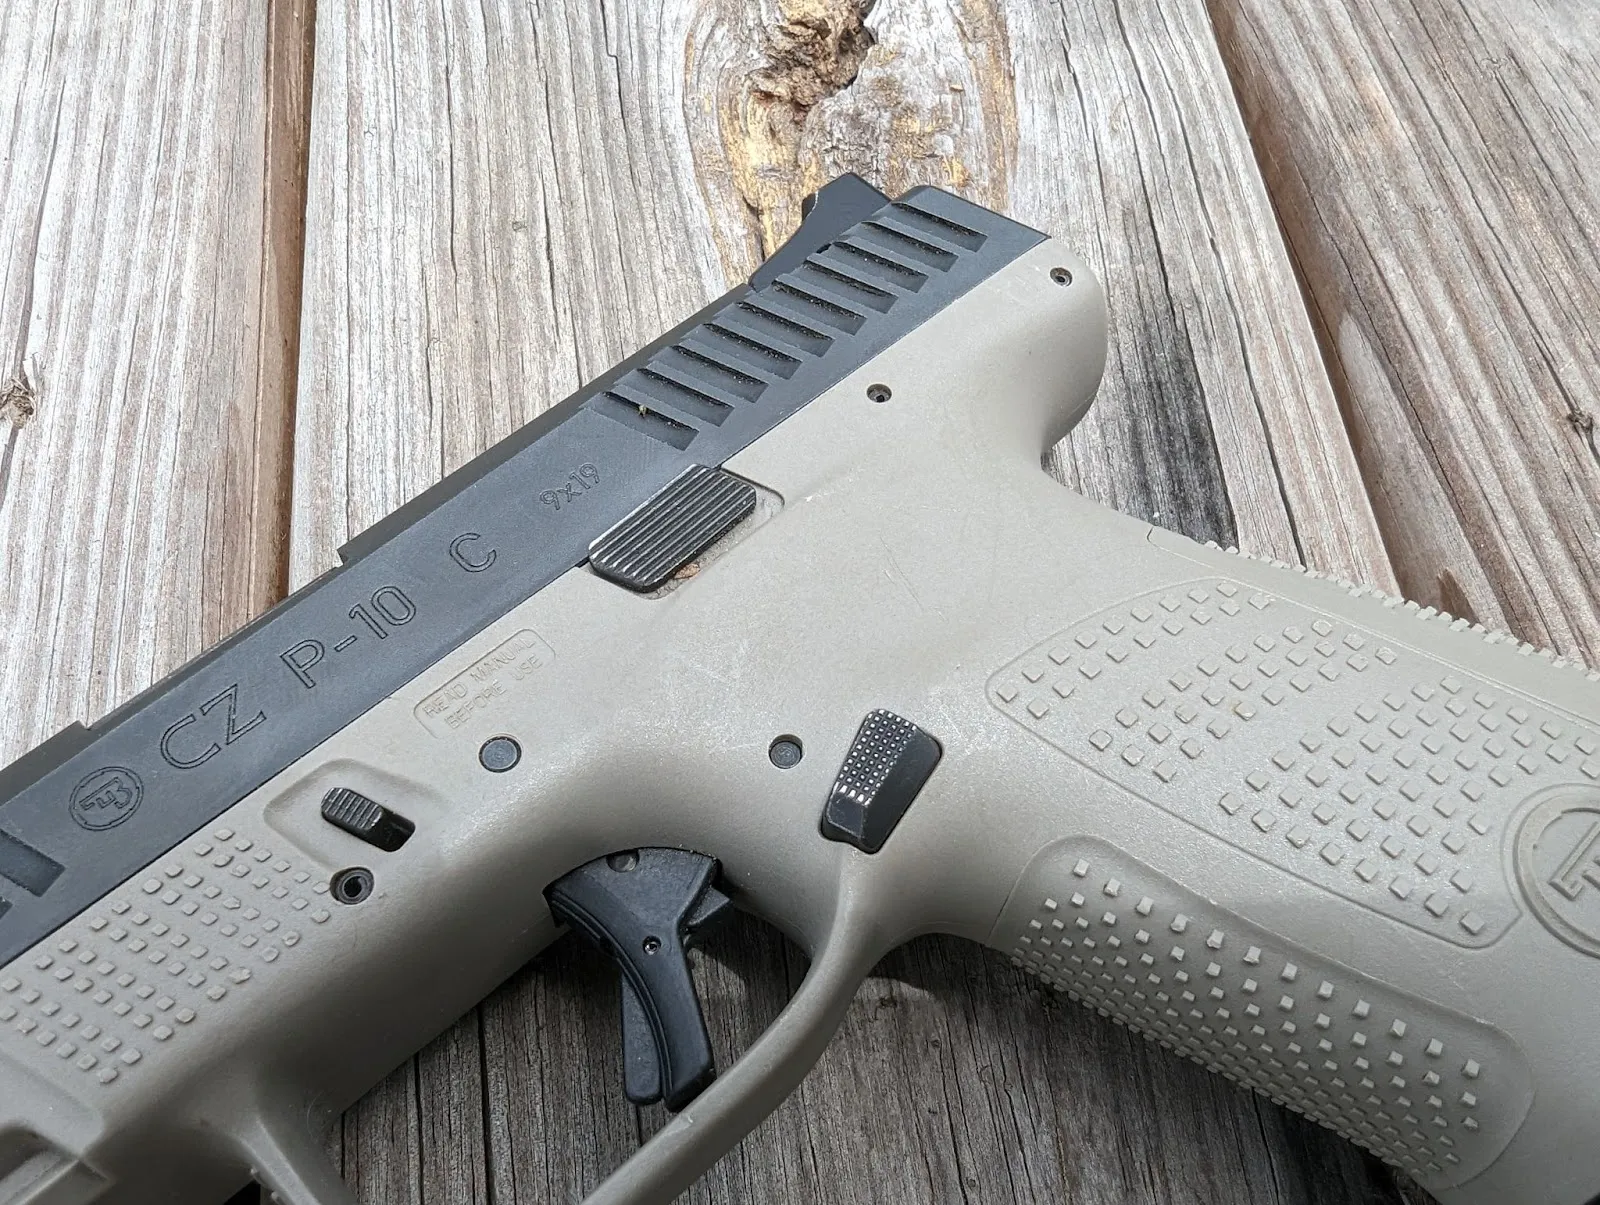 Cz p10c close up with trigger controls mag release